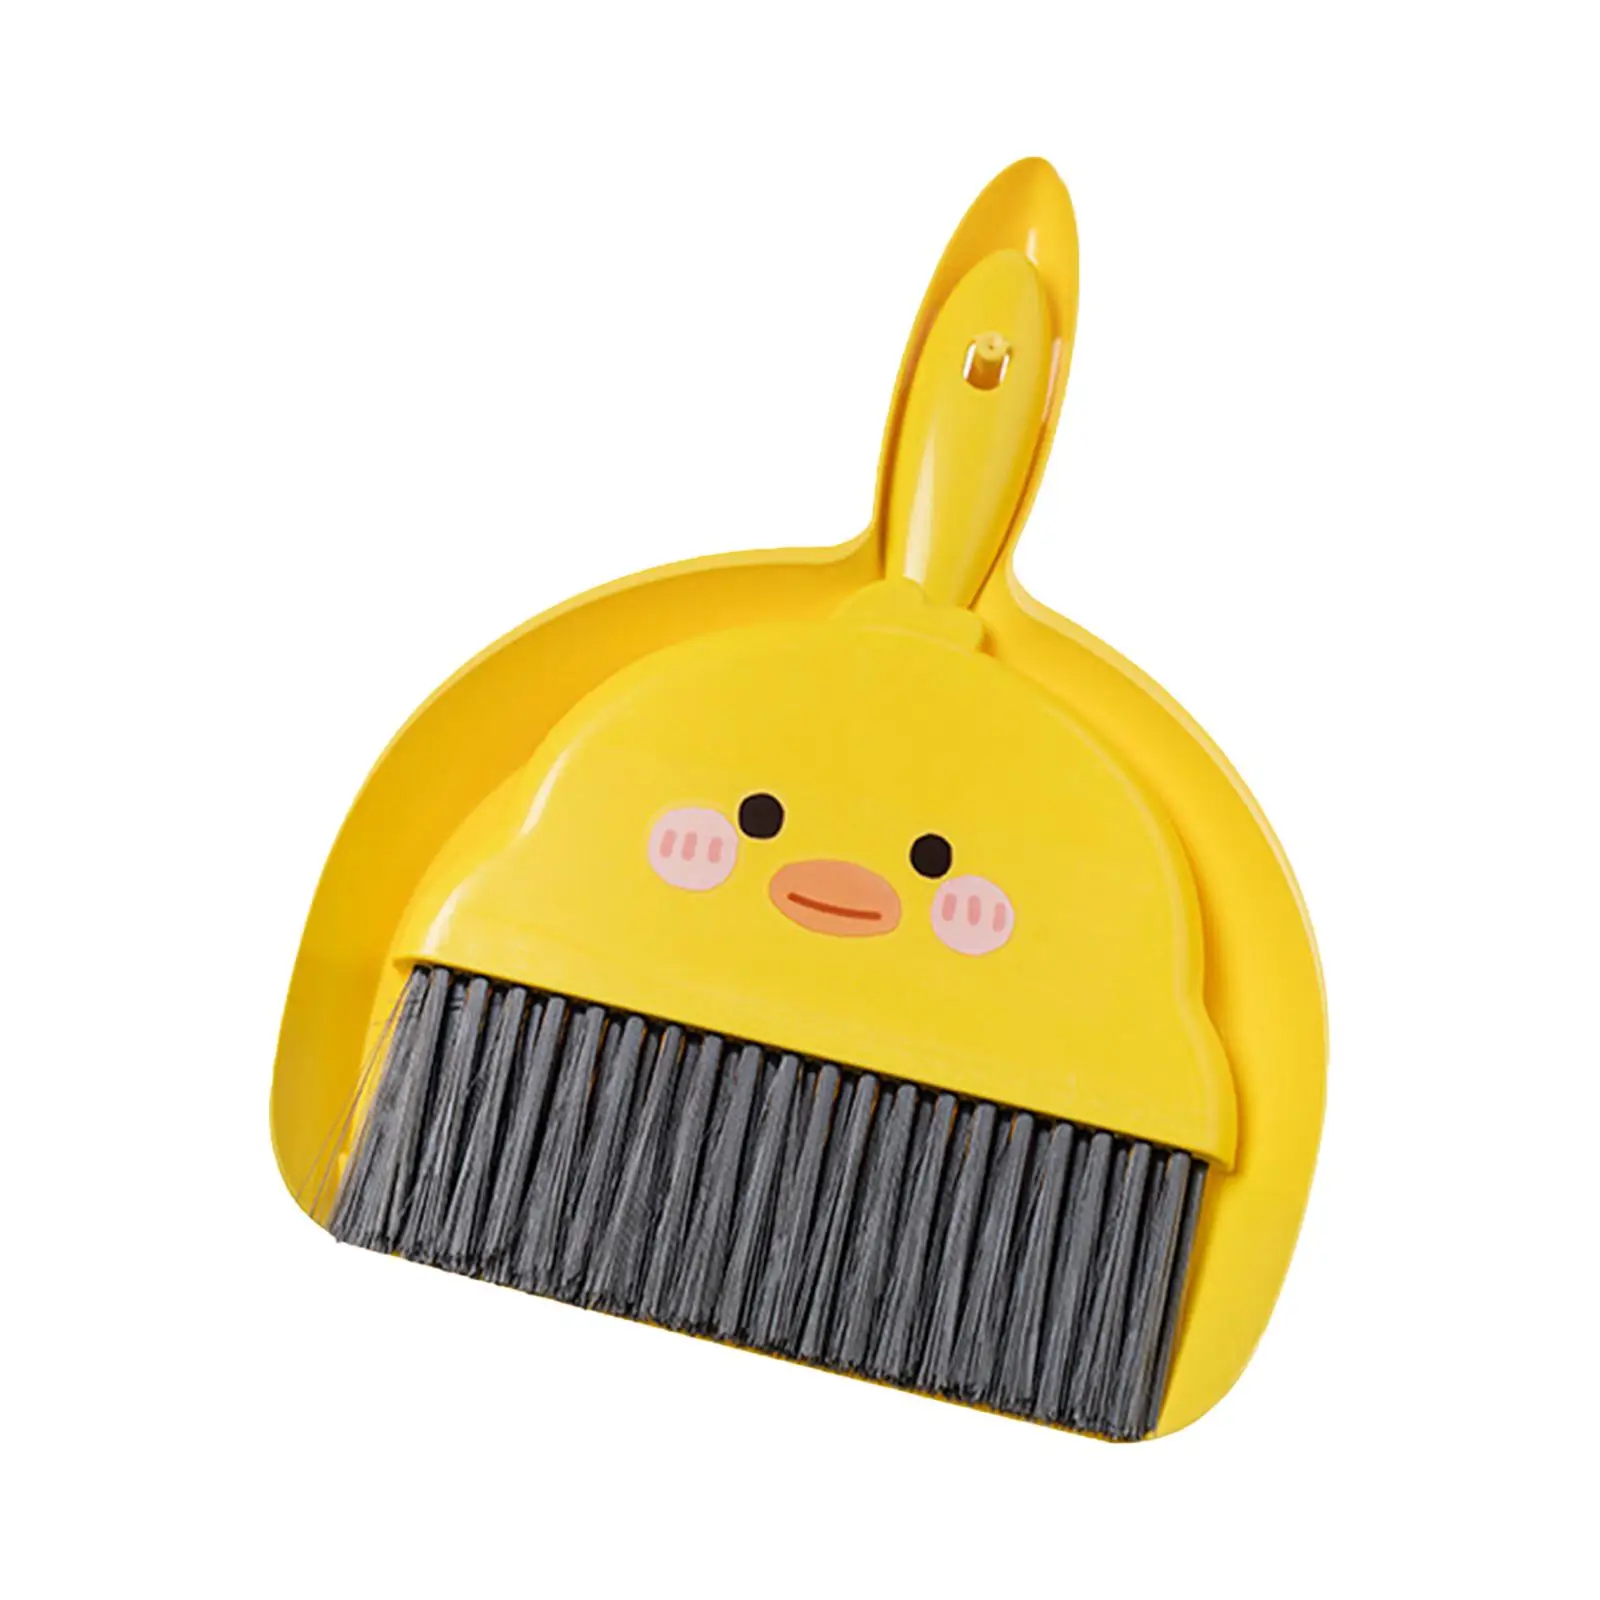 Mini Broom and Dustpan Set Mini Dustpan and Brush Set for Housekeeping Play Set Sofa Cleaning for Kids Living Room Cleaning Toys